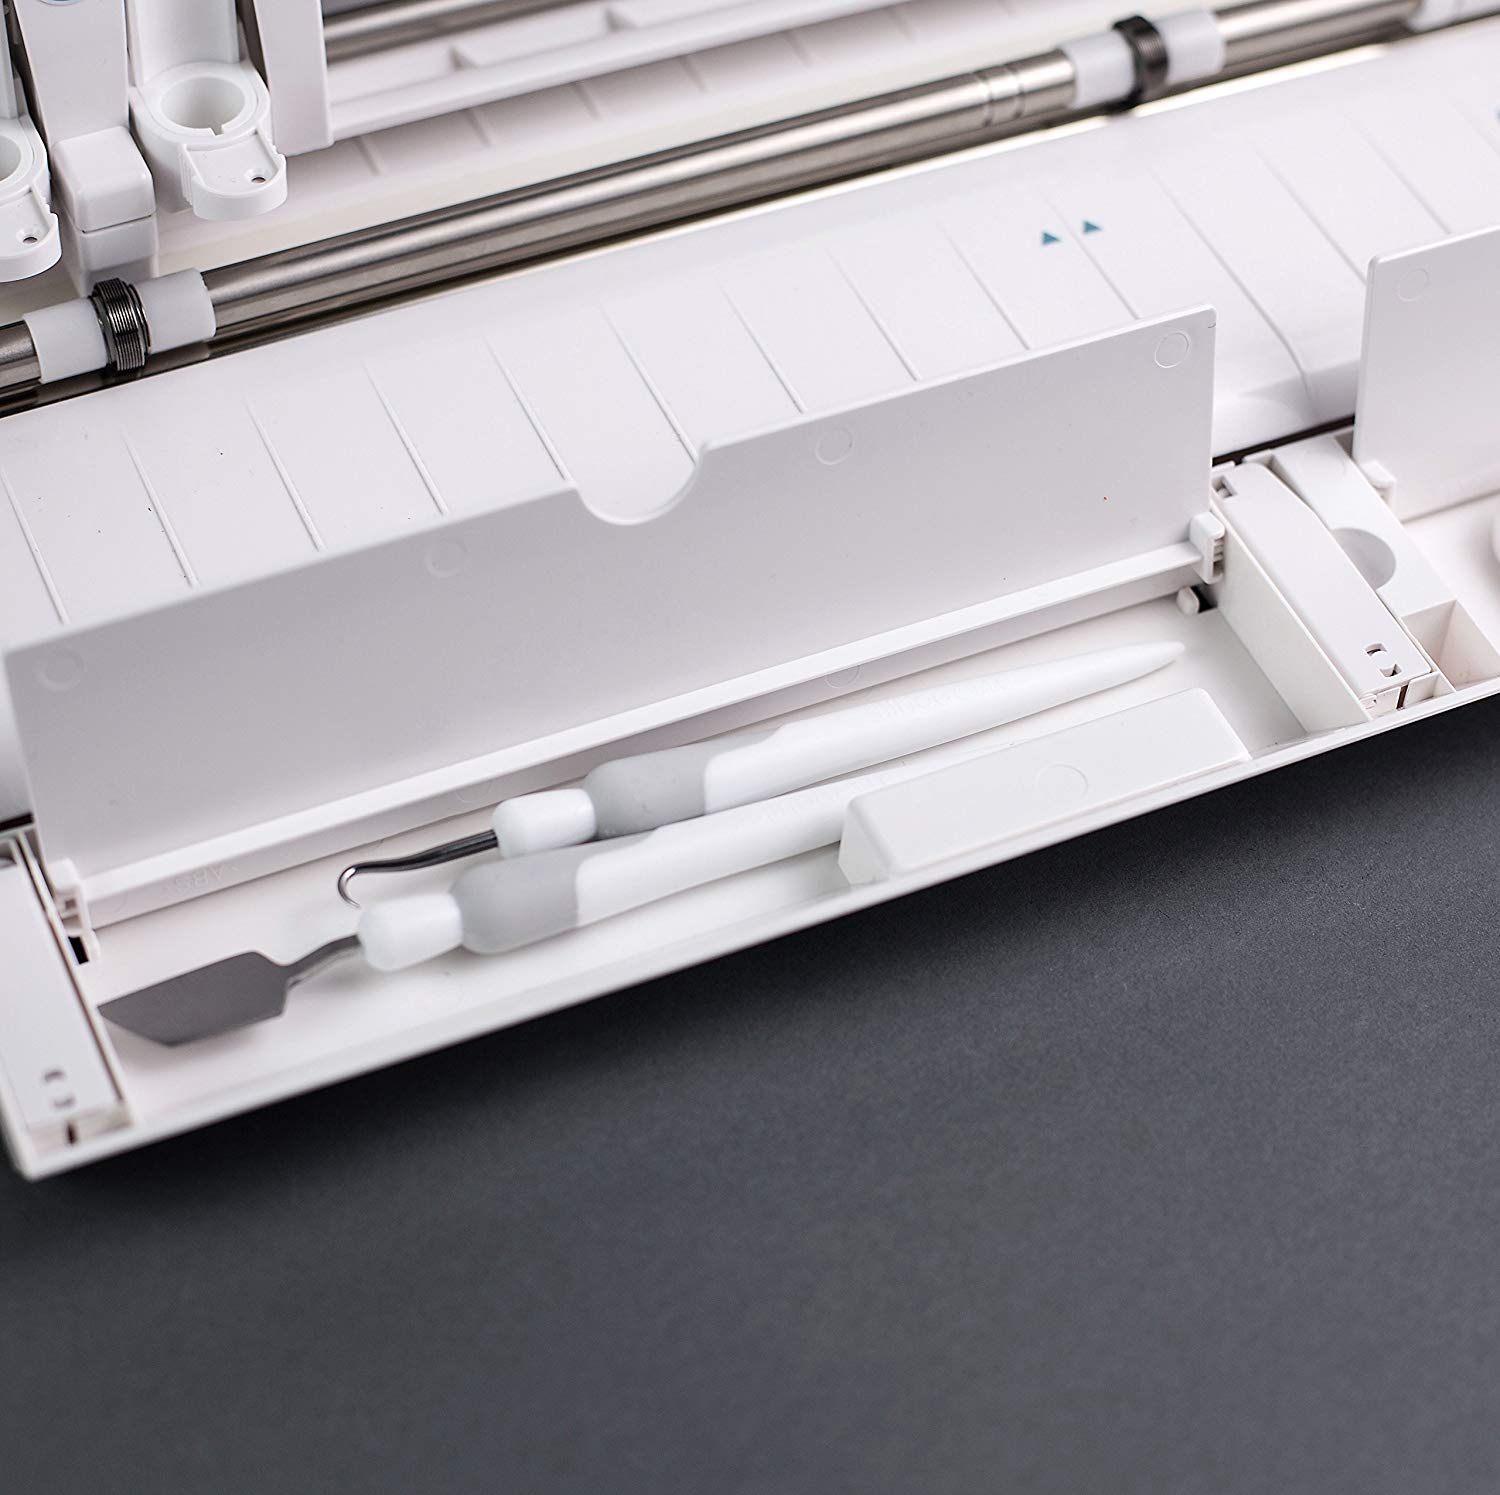 Silhouette Cameo 3 has two hidden compartments. A long one for pens and tools and a short one for pen blades.